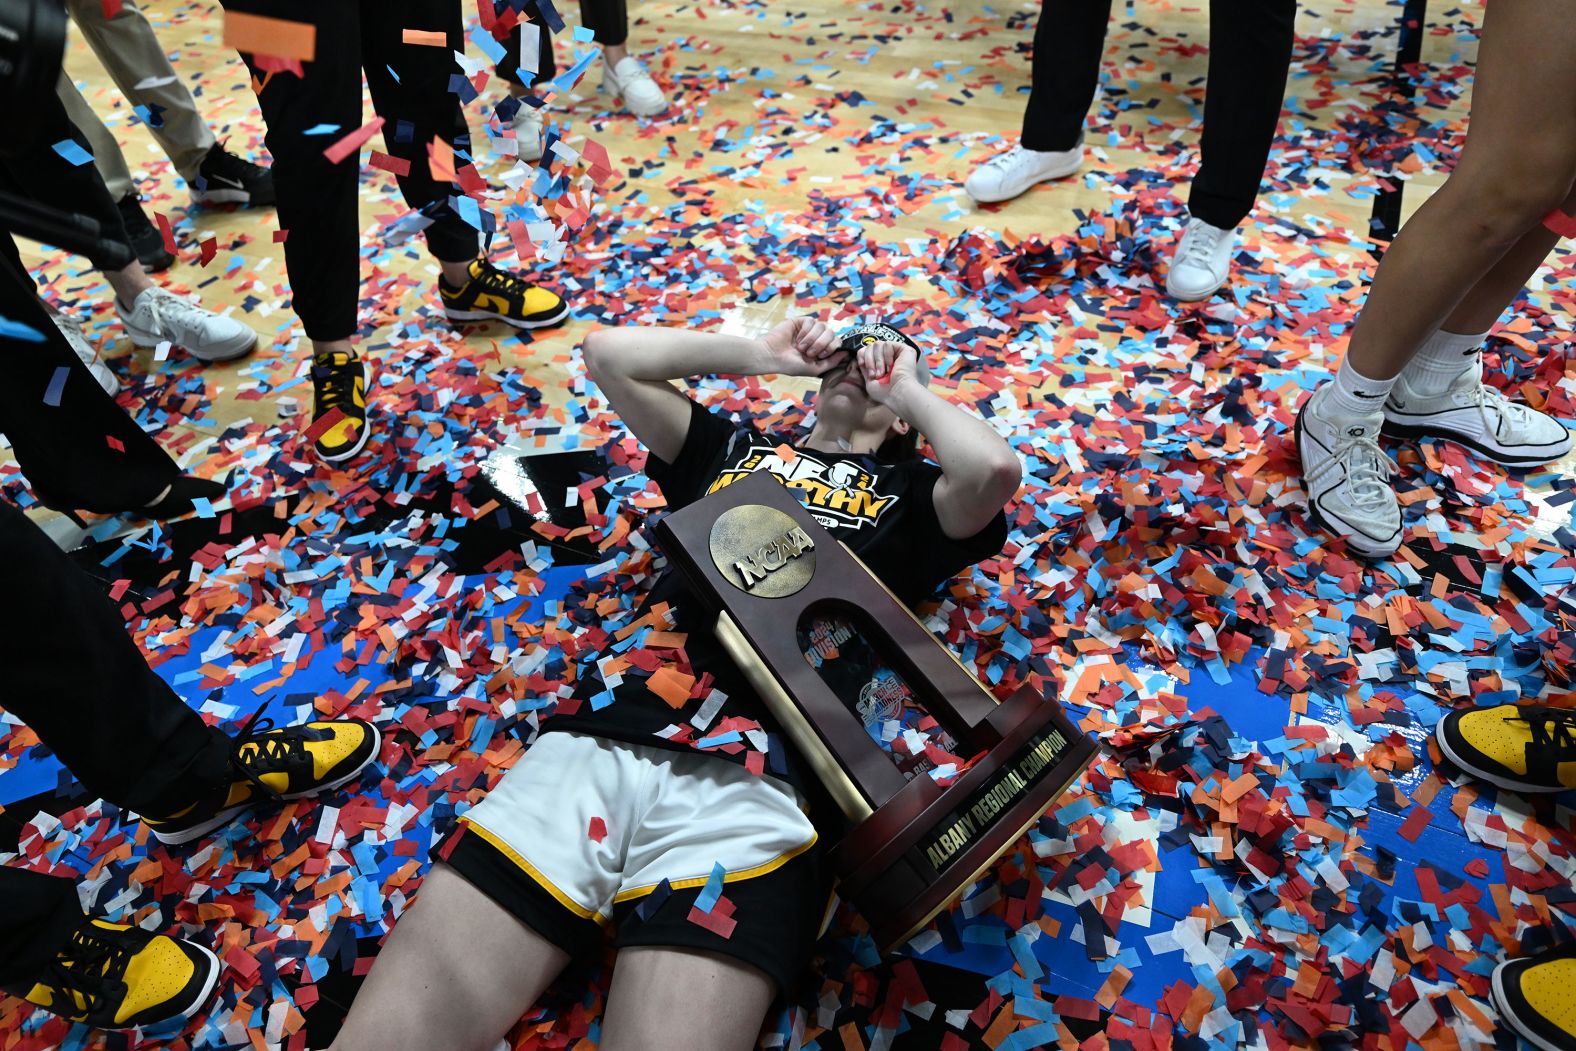 Confetti falls around Iowa superstar Caitlin Clark after <a href="index.php?page=&url=https%3A%2F%2Fwww.cnn.com%2F2024%2F04%2F01%2Fsport%2Fiowa-lsu-elite-eight-caitlin-clark-spt-intl%2Findex.html" target="_blank">the Hawkeyes defeated LSU 94-87</a> to advance to the Final Four of the NCAA Tournament on Monday, April 1. Clark scored 41 points in what was a rematch of <a href="index.php?page=&url=http%3A%2F%2Fwww.cnn.com%2F2023%2F04%2F02%2Fsport%2Fgallery%2Fiowa-lsu-ncaa-womens-final-photos%2Findex.html" target="_blank">last year's championship game</a>.